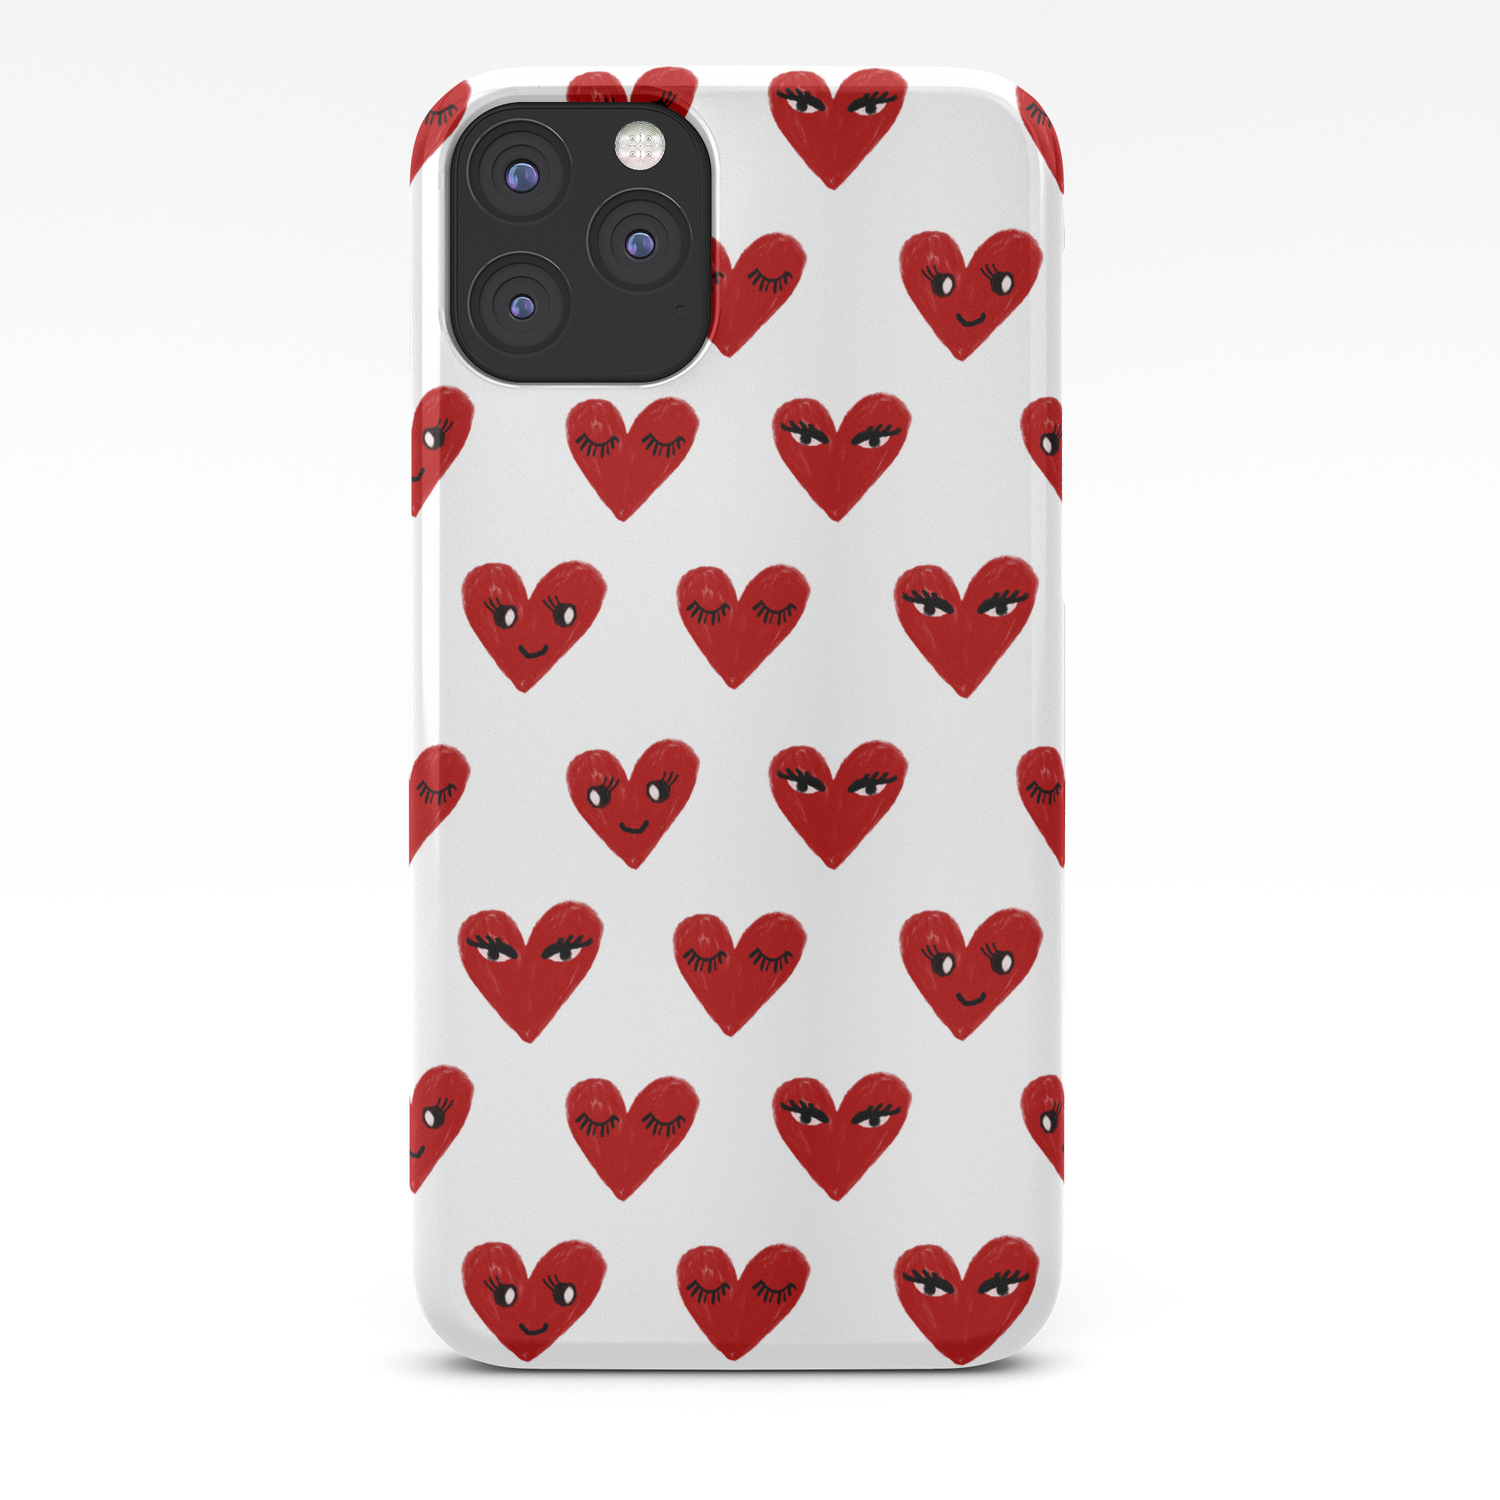 Valentine's Day Gift iPhone Case Customizable